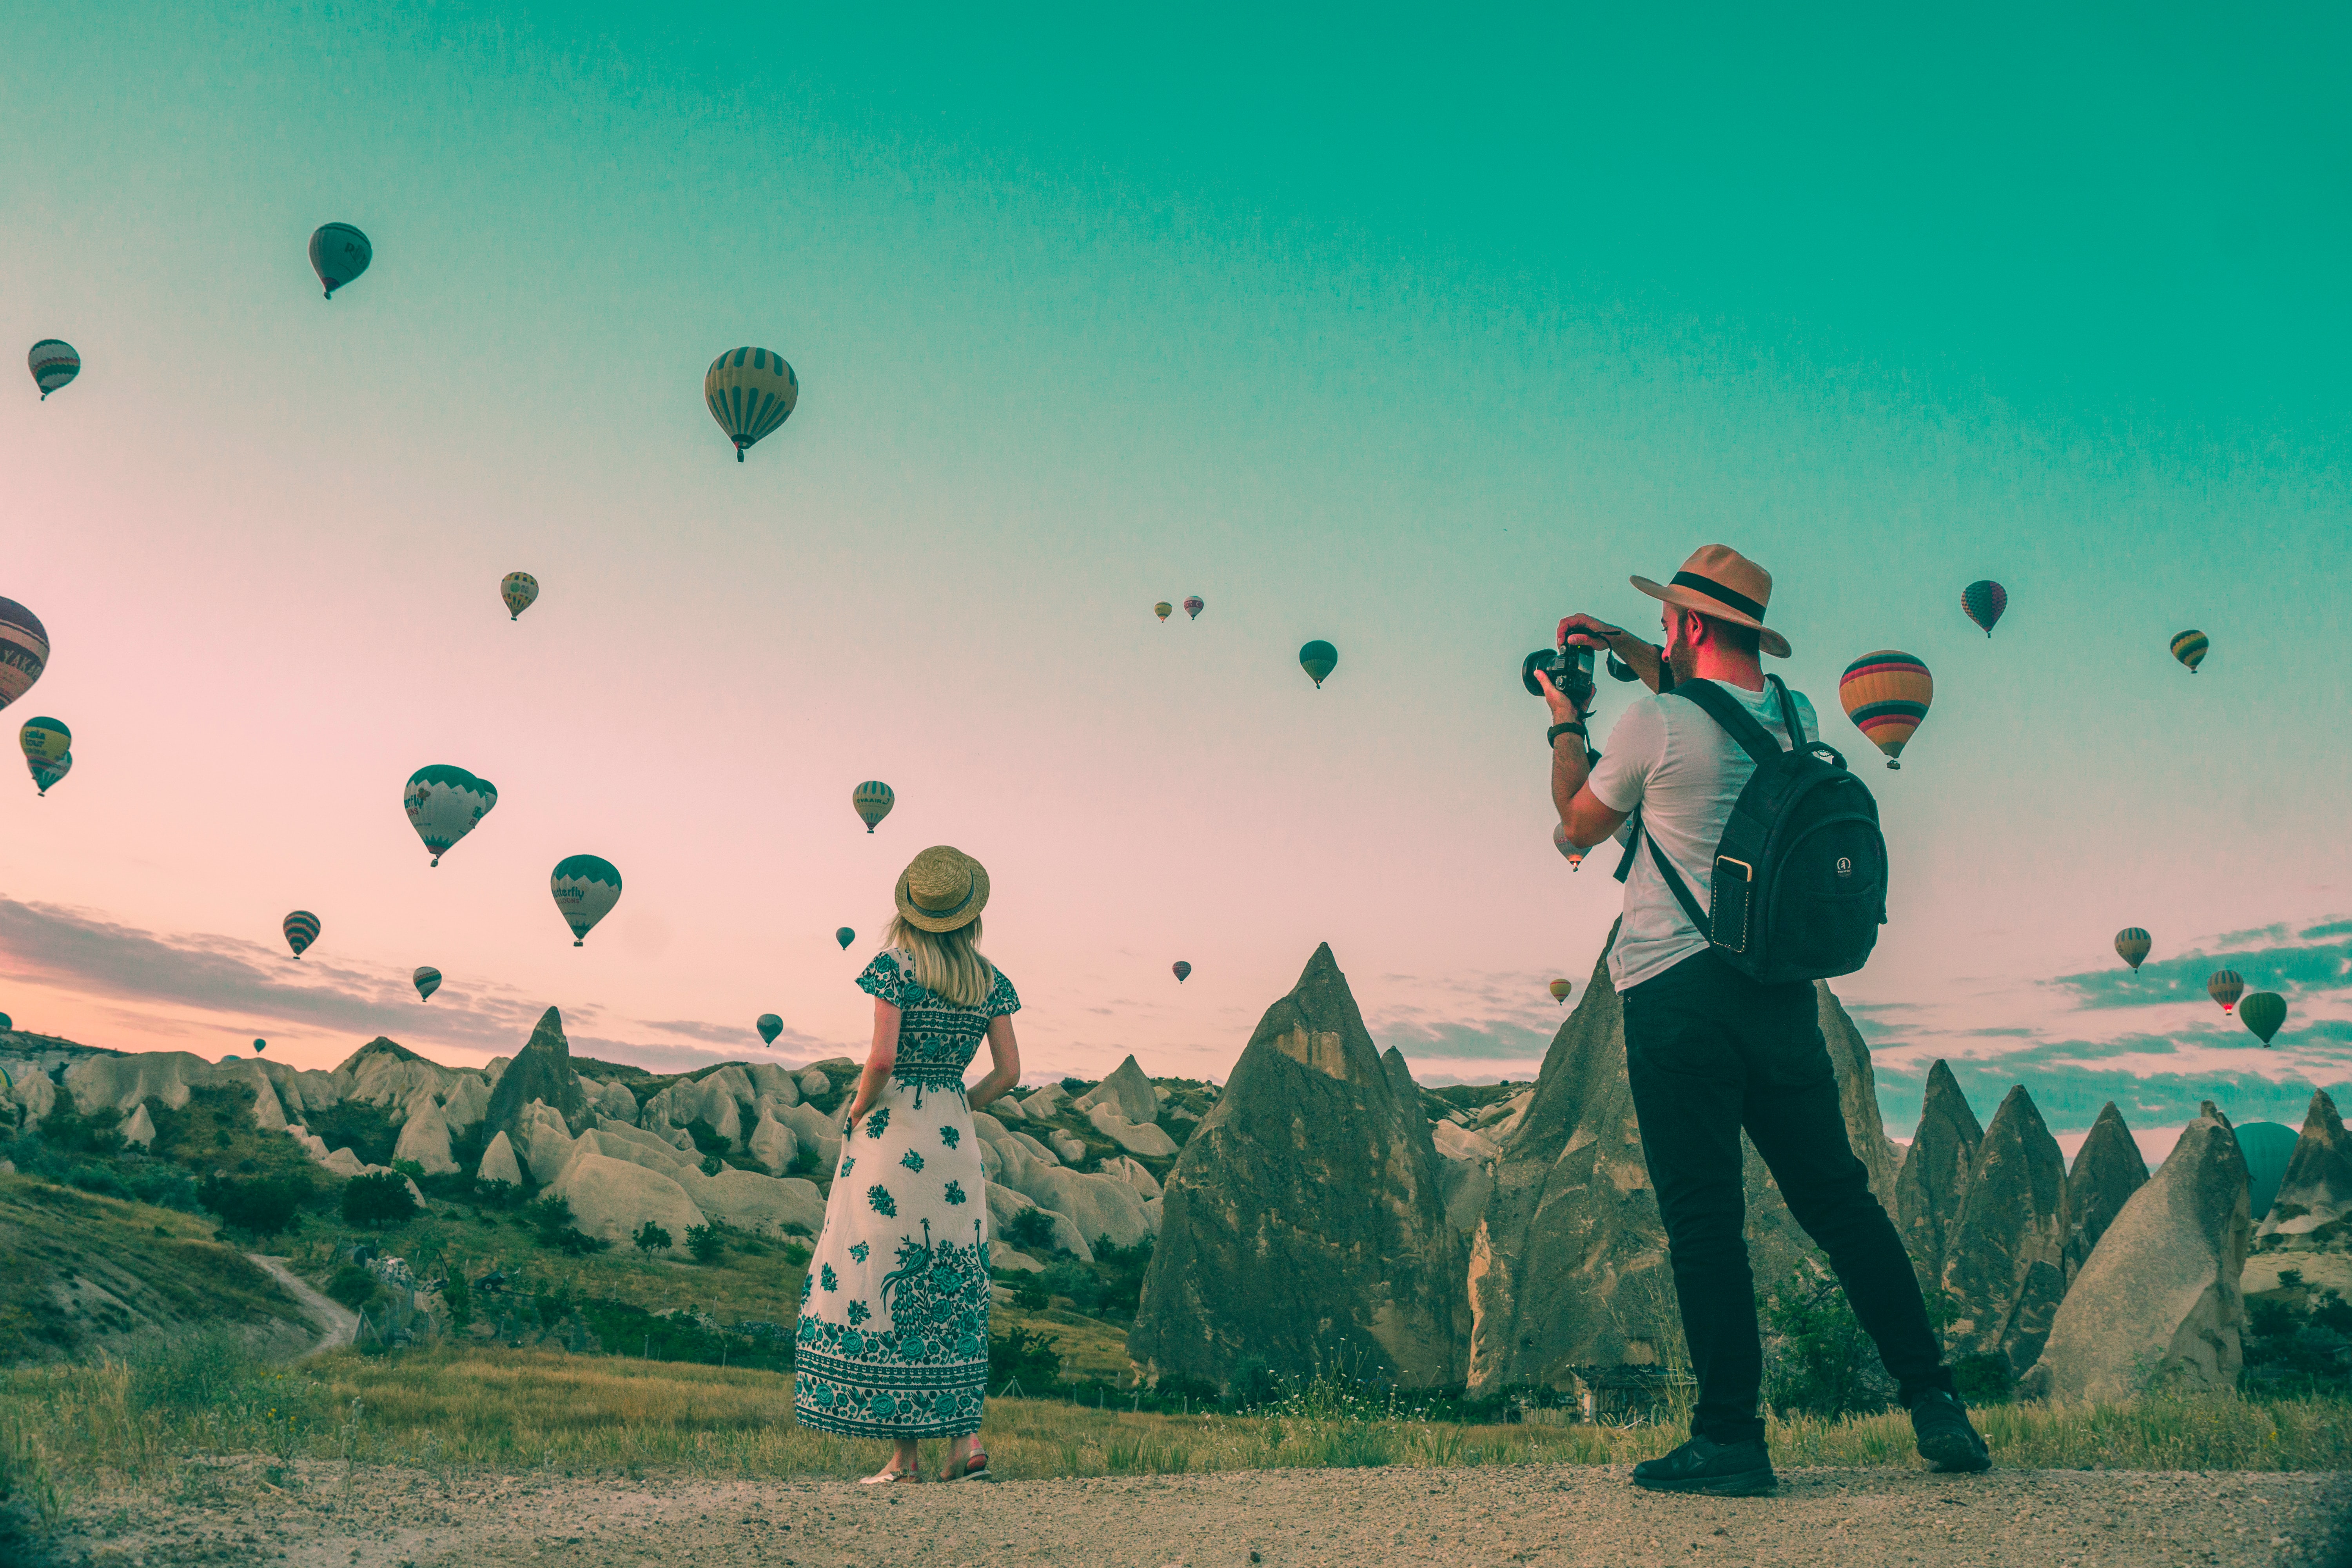 Two people taking pictures surrounded by rock structures and hot air balloons